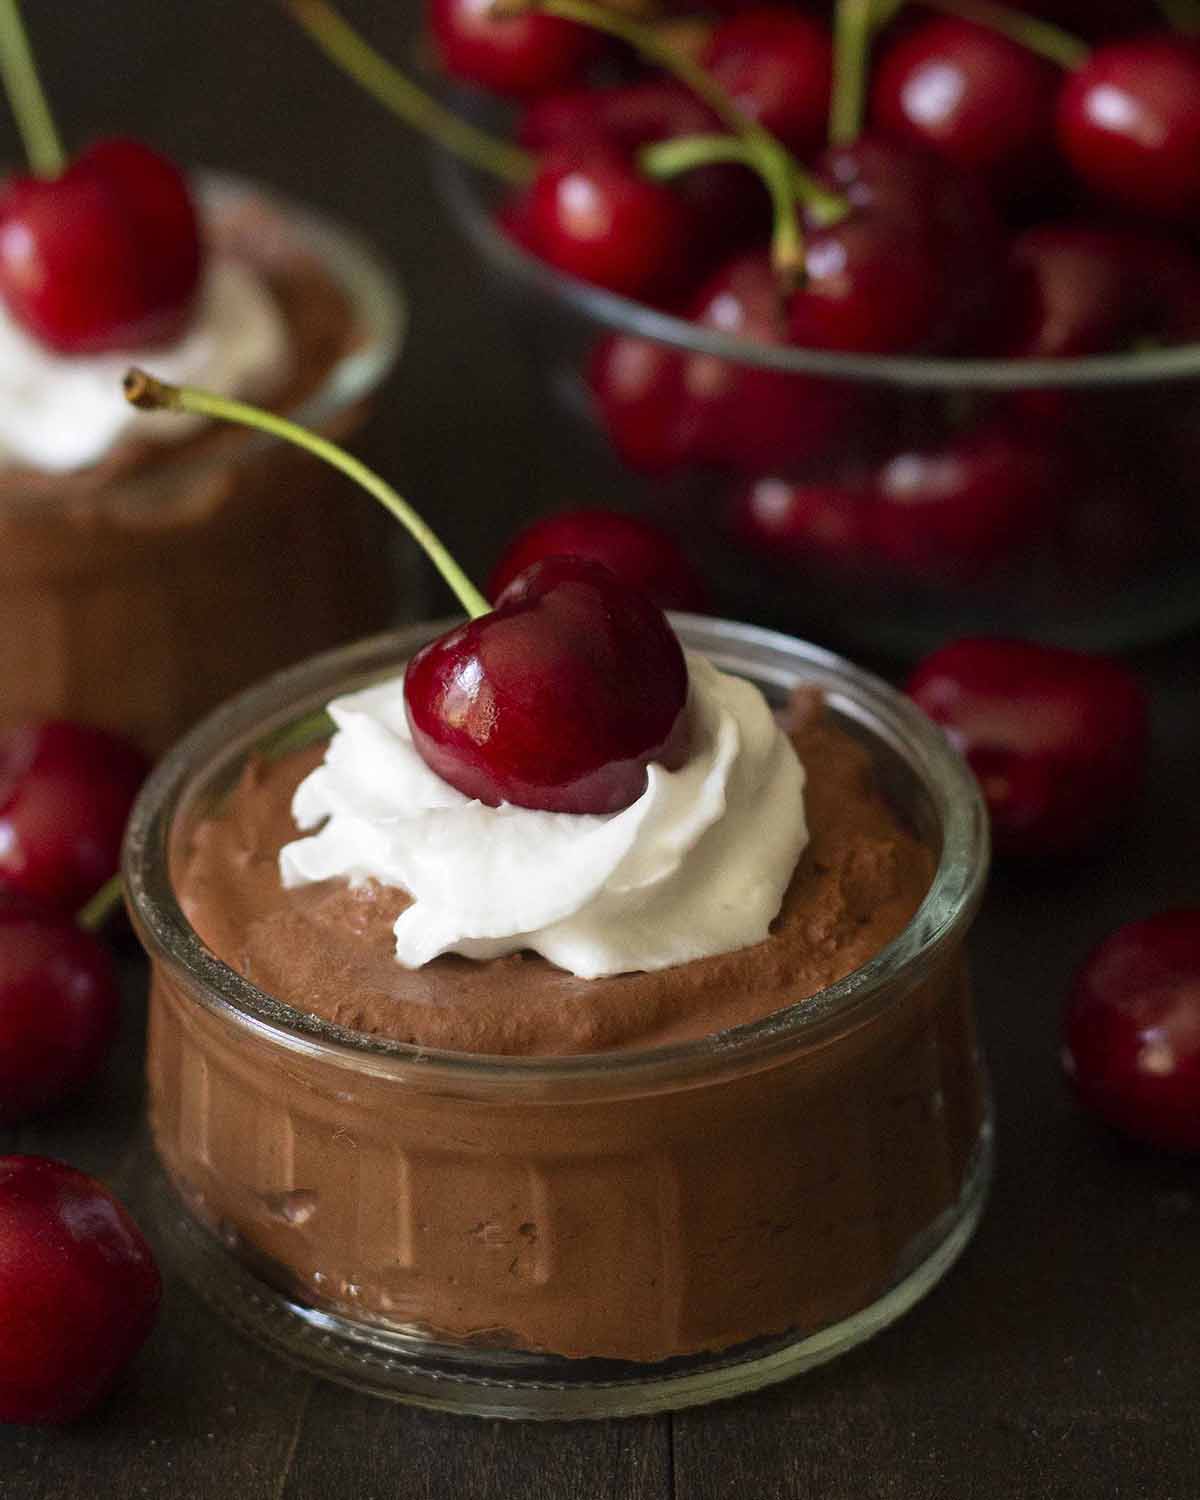 A close up shot of vegan chocolate mousse in a glass bowl, mousse has whipped cream and a cherry on top.